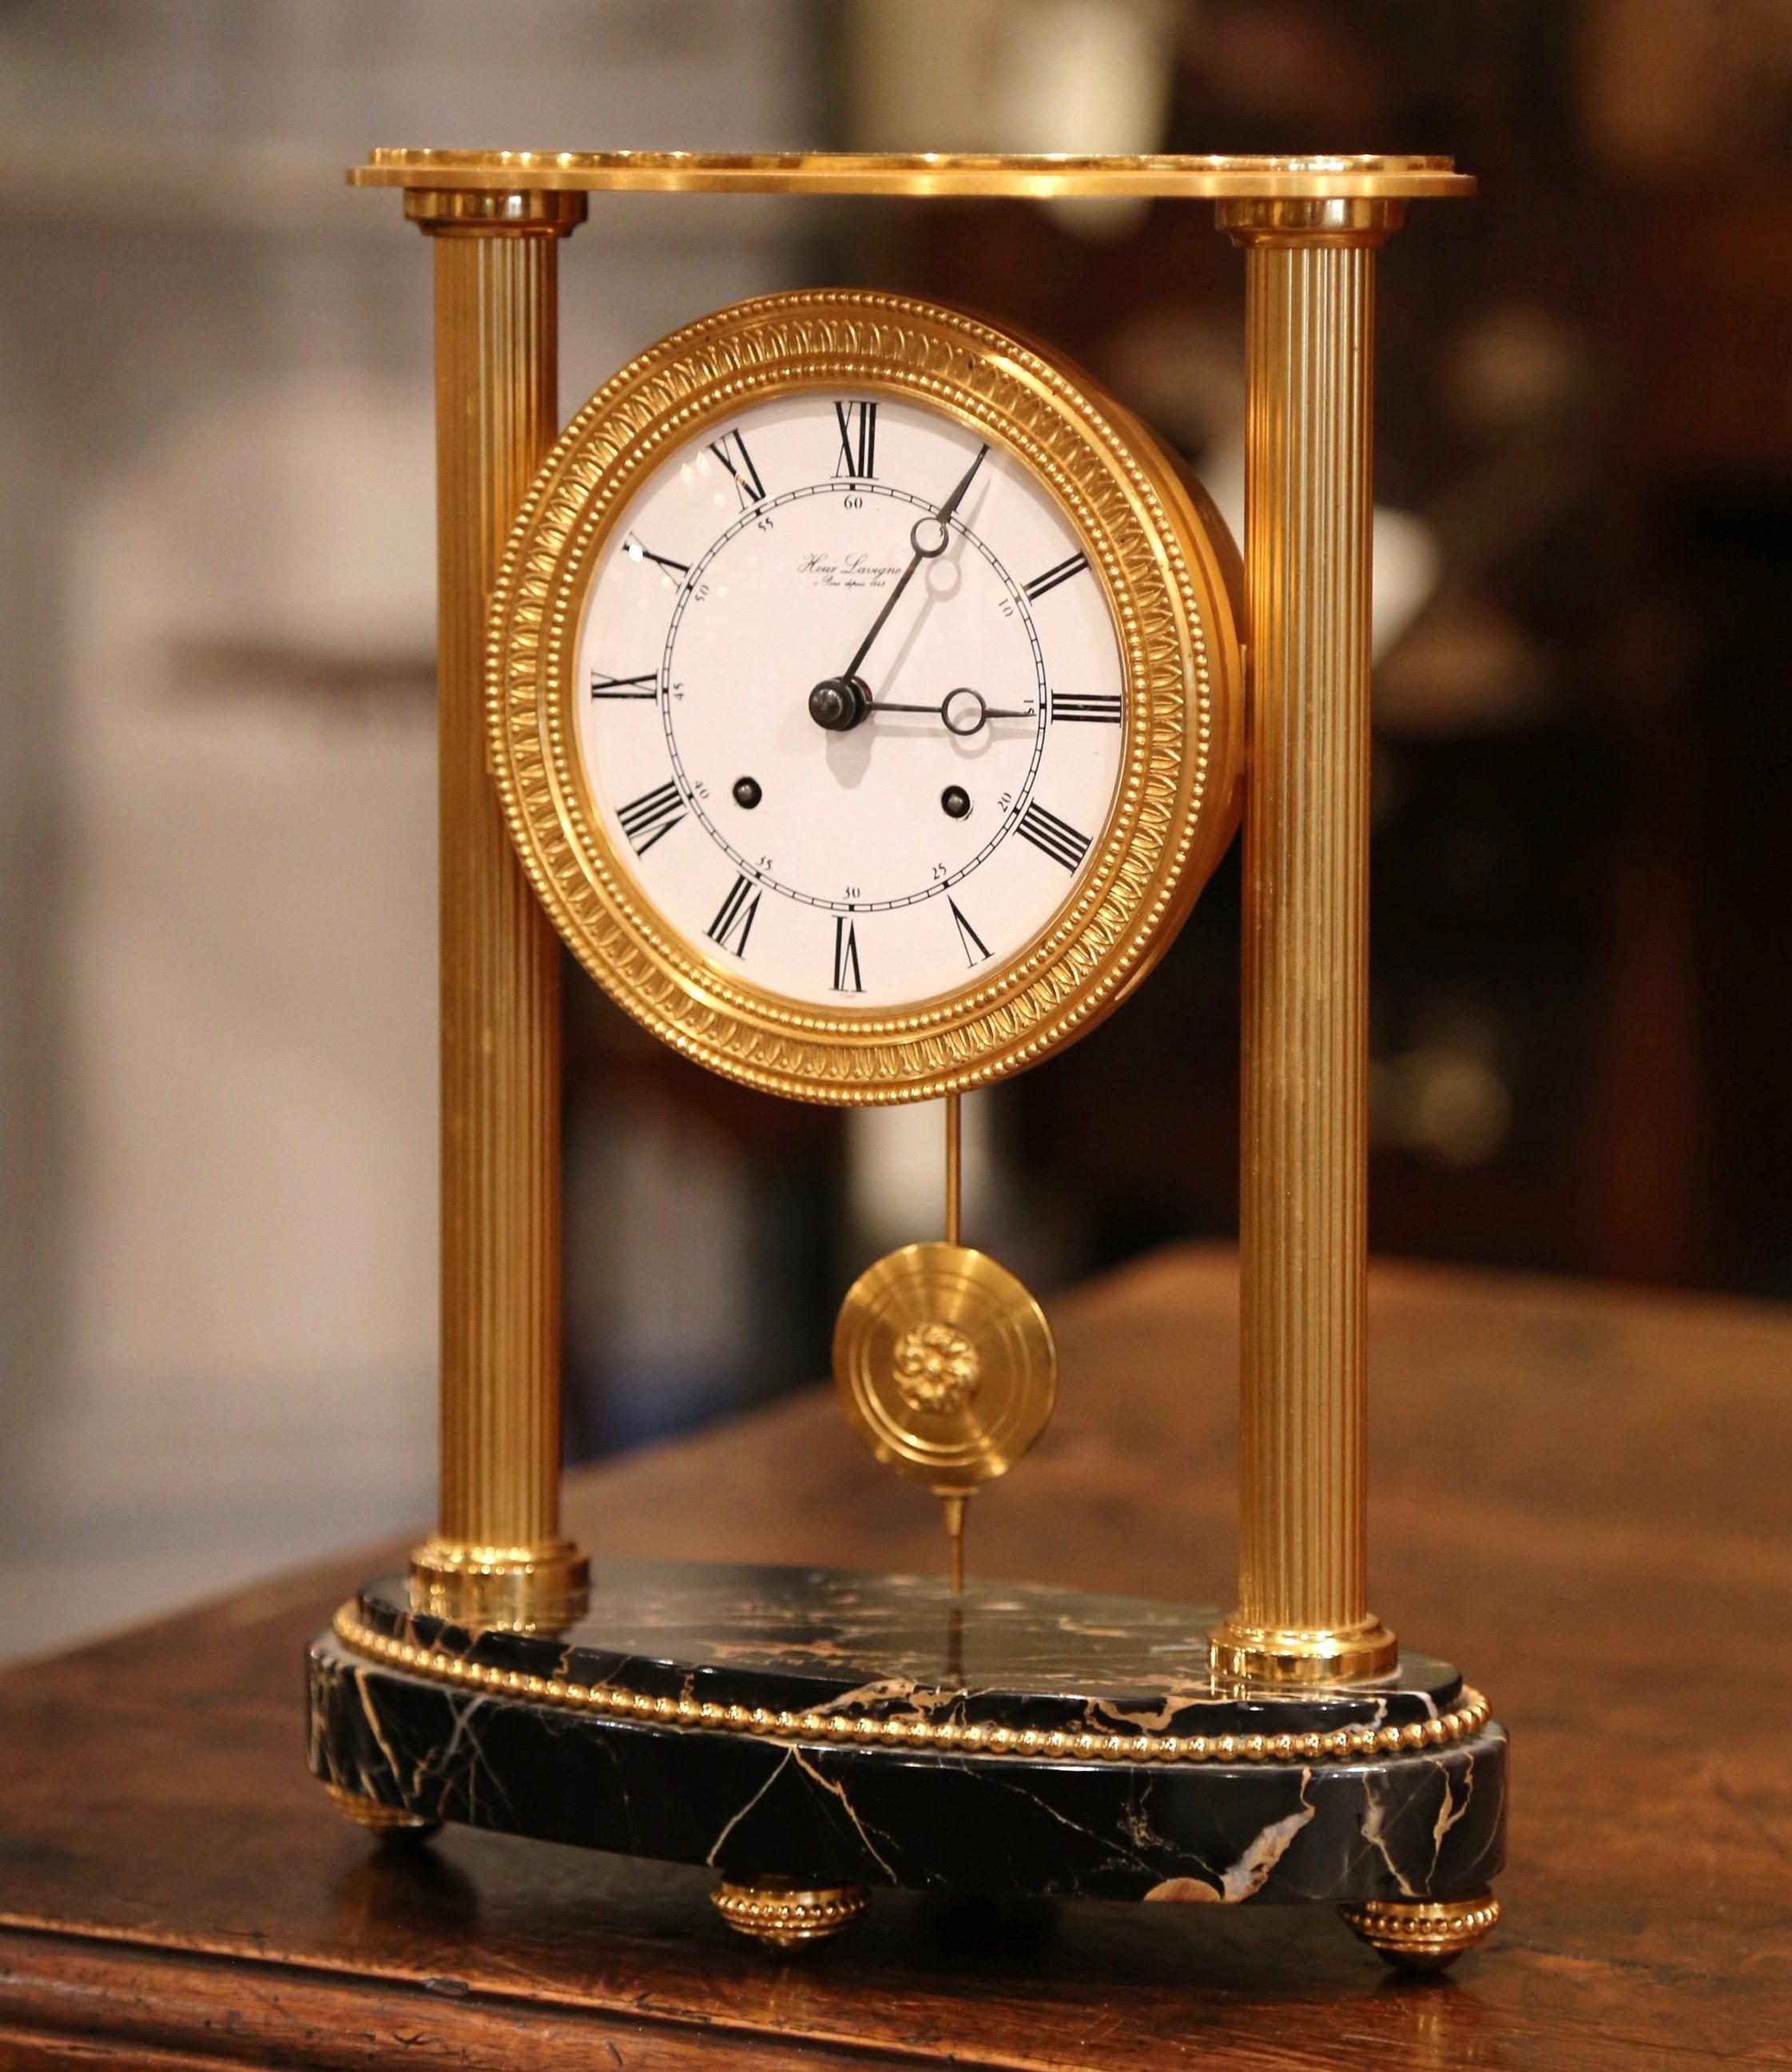 This elegant antique table clock was created in Paris, circa 1890. Oval in shape, the clock sits on a black marble base over four small round feet. The desk clock features bronze columns on each side, which hold a porcelain clock face signed Hour